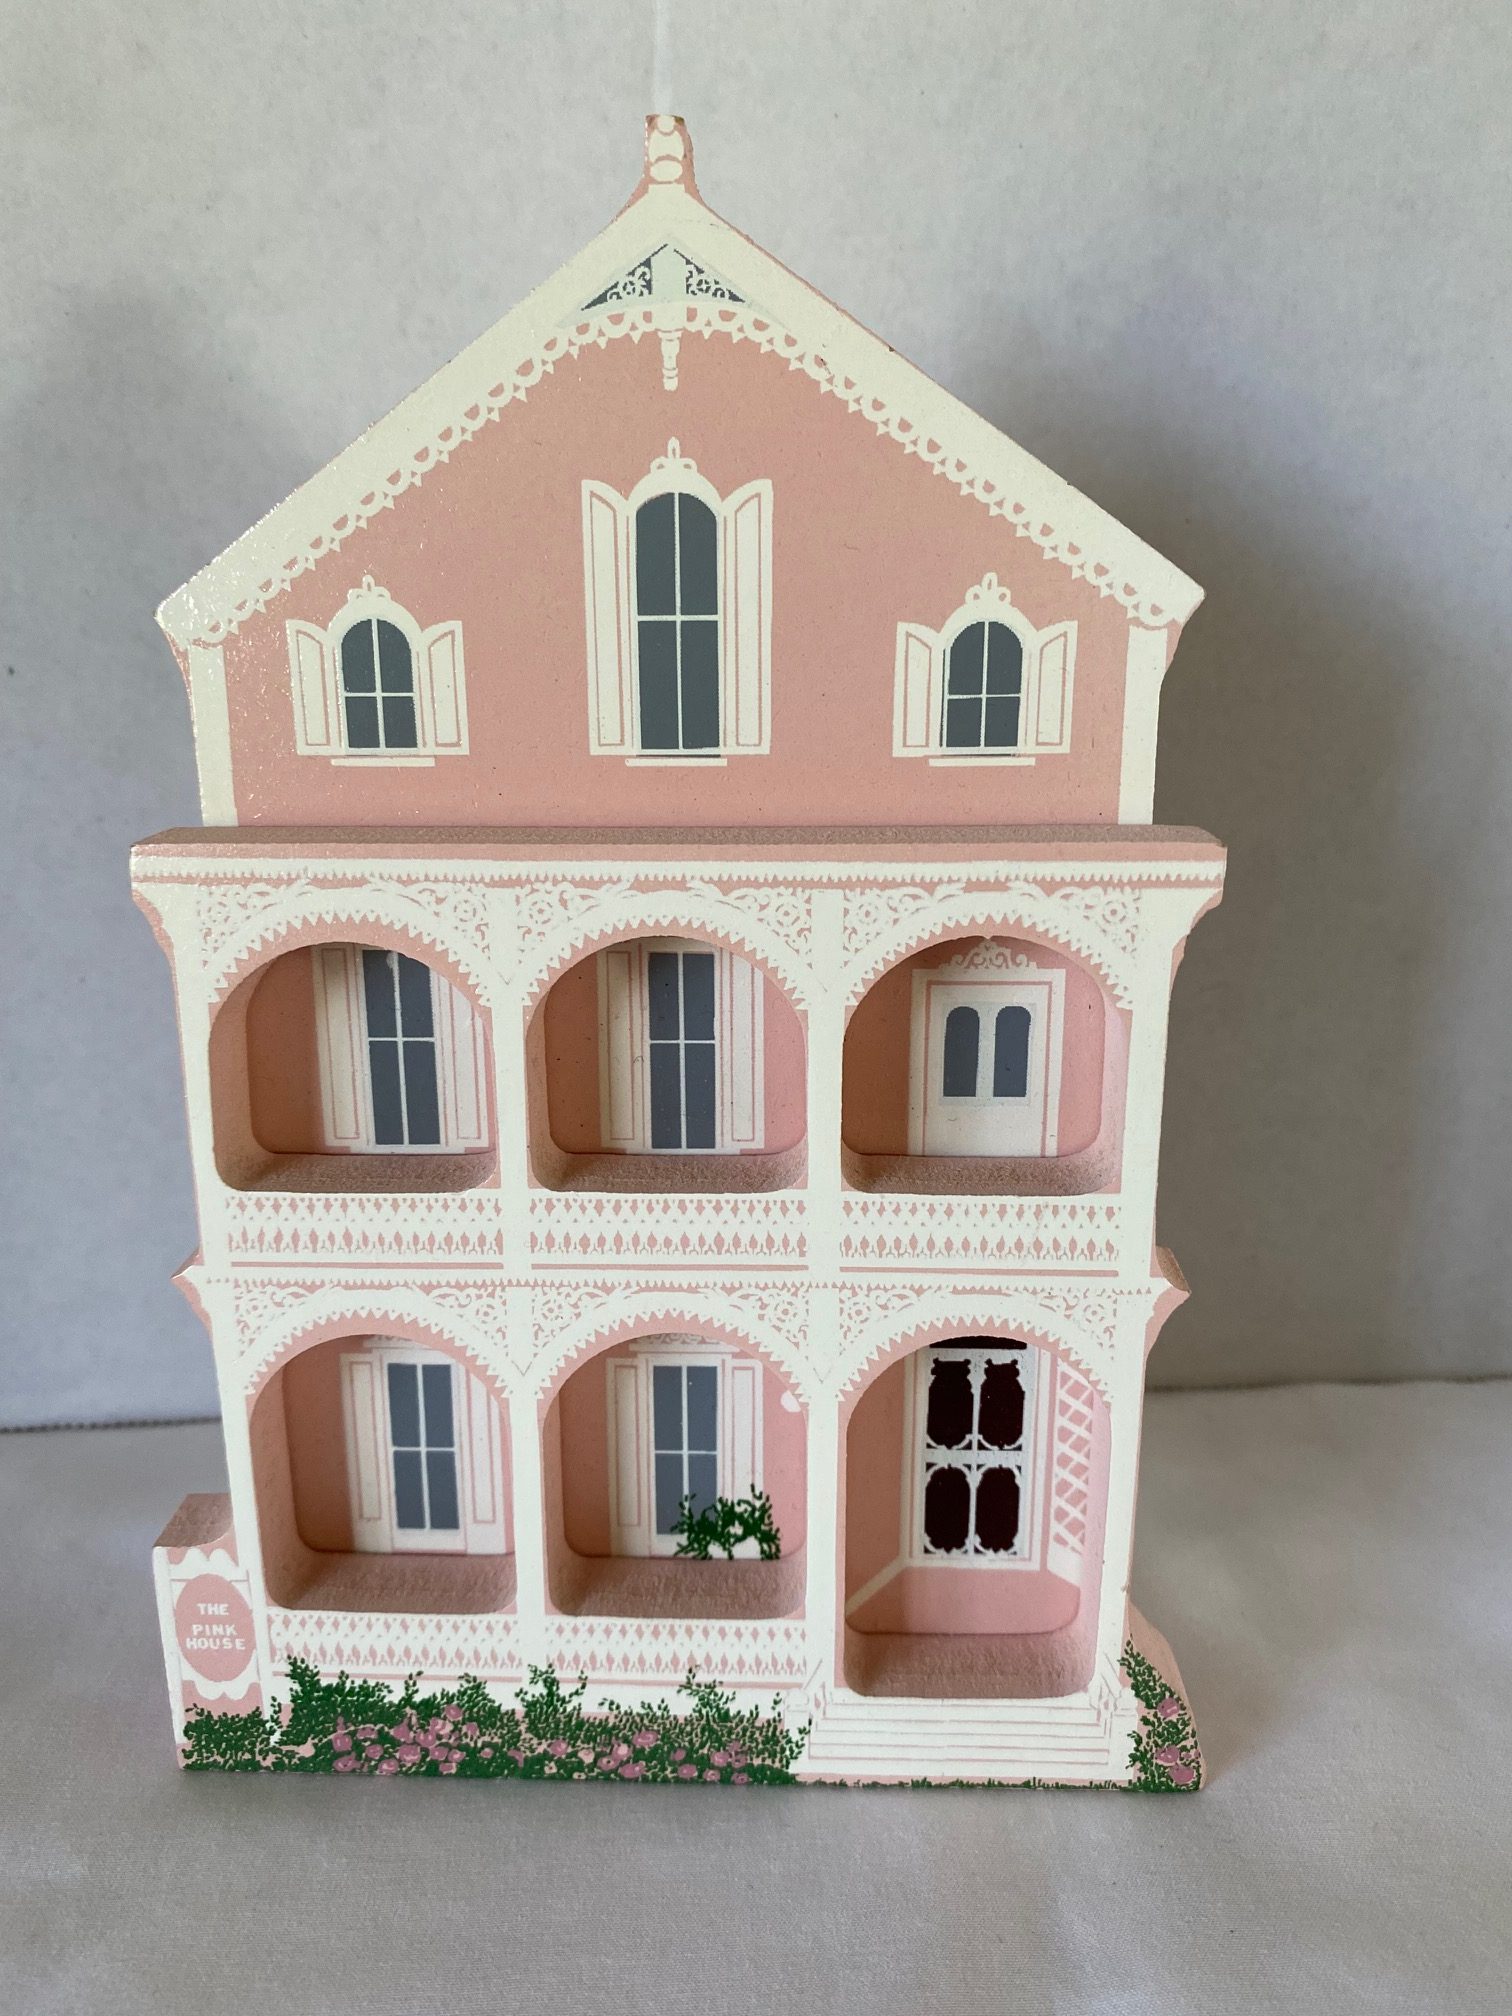 Sheila’s Collectable Wooden Hand Painted Shelf Sitters “The Pink House” 1992